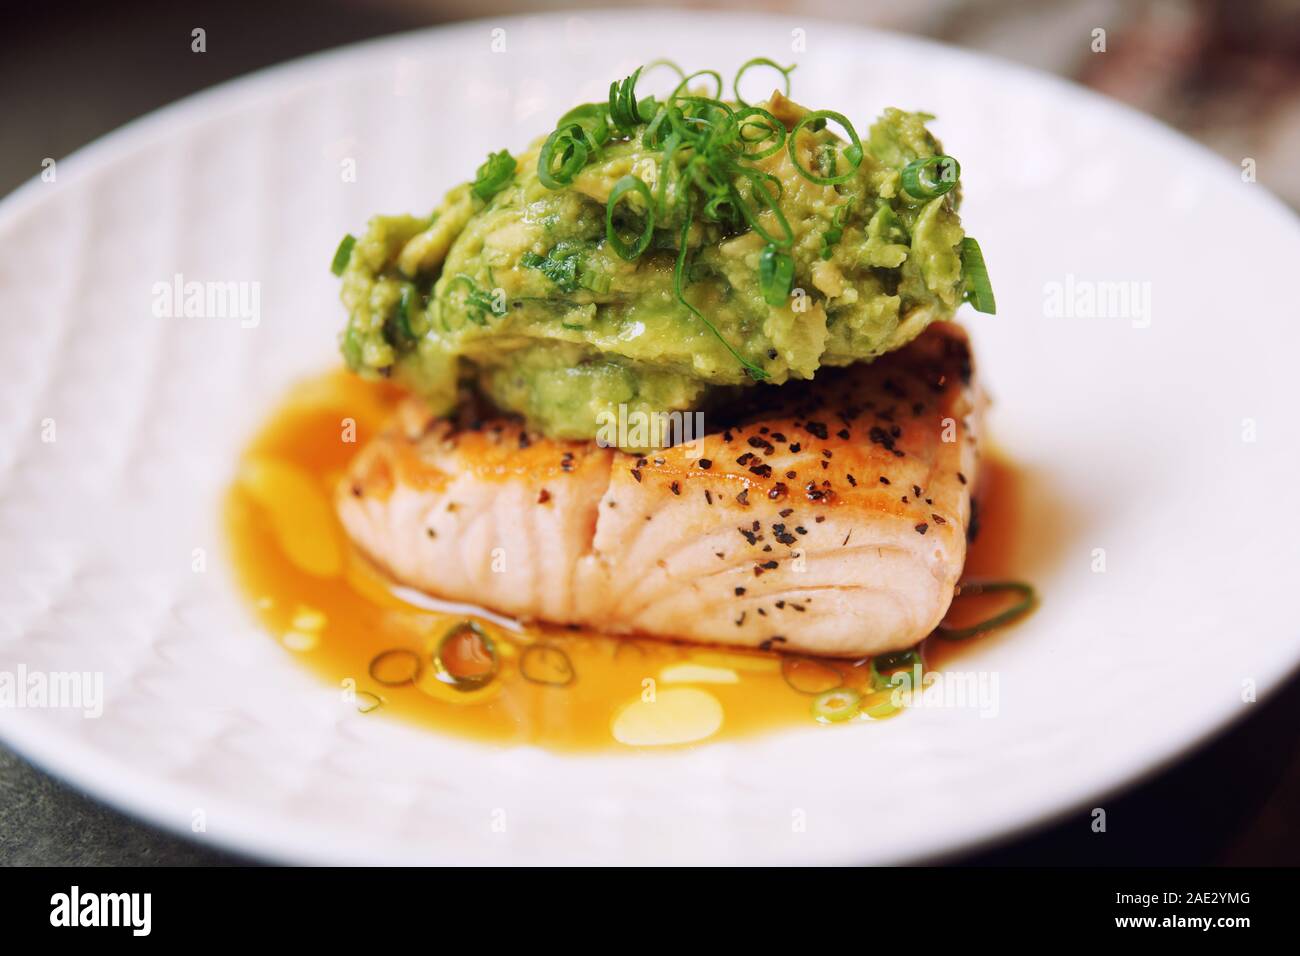 Grilled salmon fillet topped with avocado mash, leek and crushed nuts, cross-processing tone Stock Photo